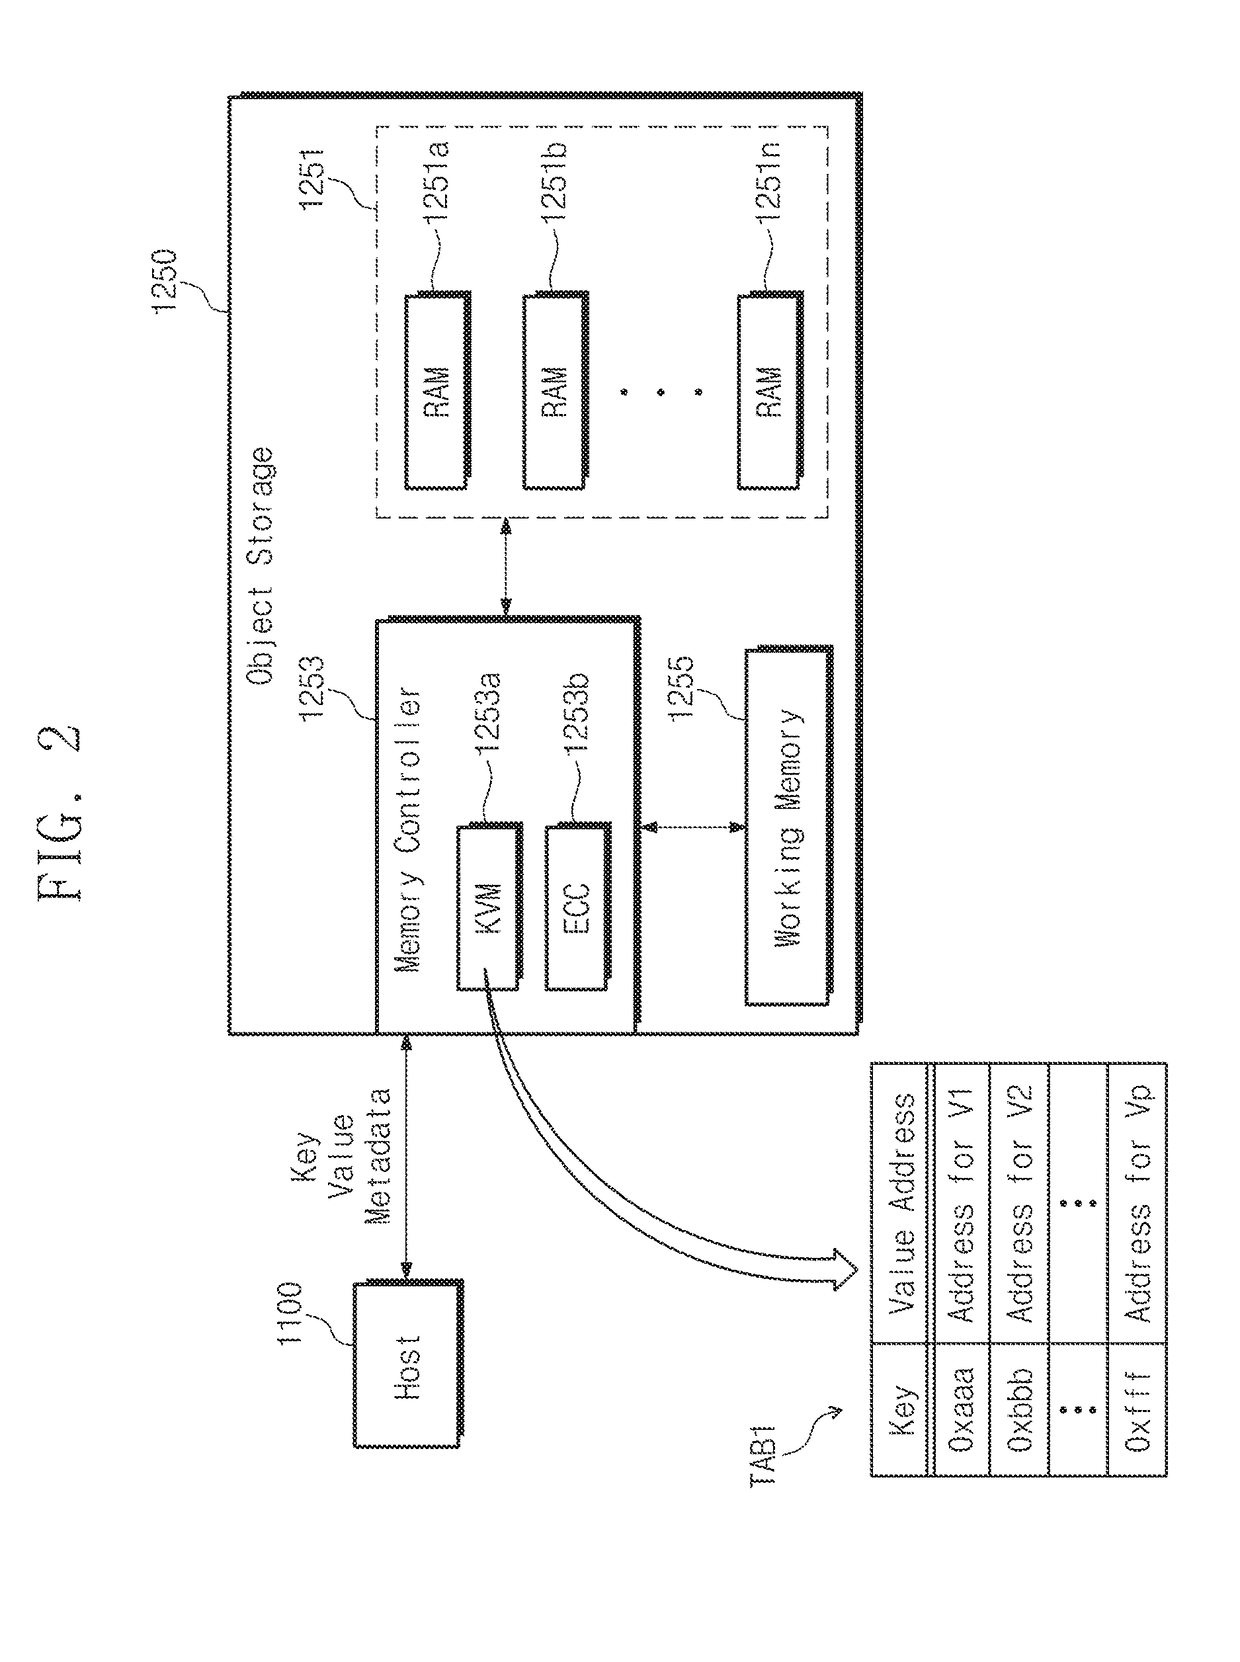 Object storage system managing error-correction-code-related data in key-value mapping information